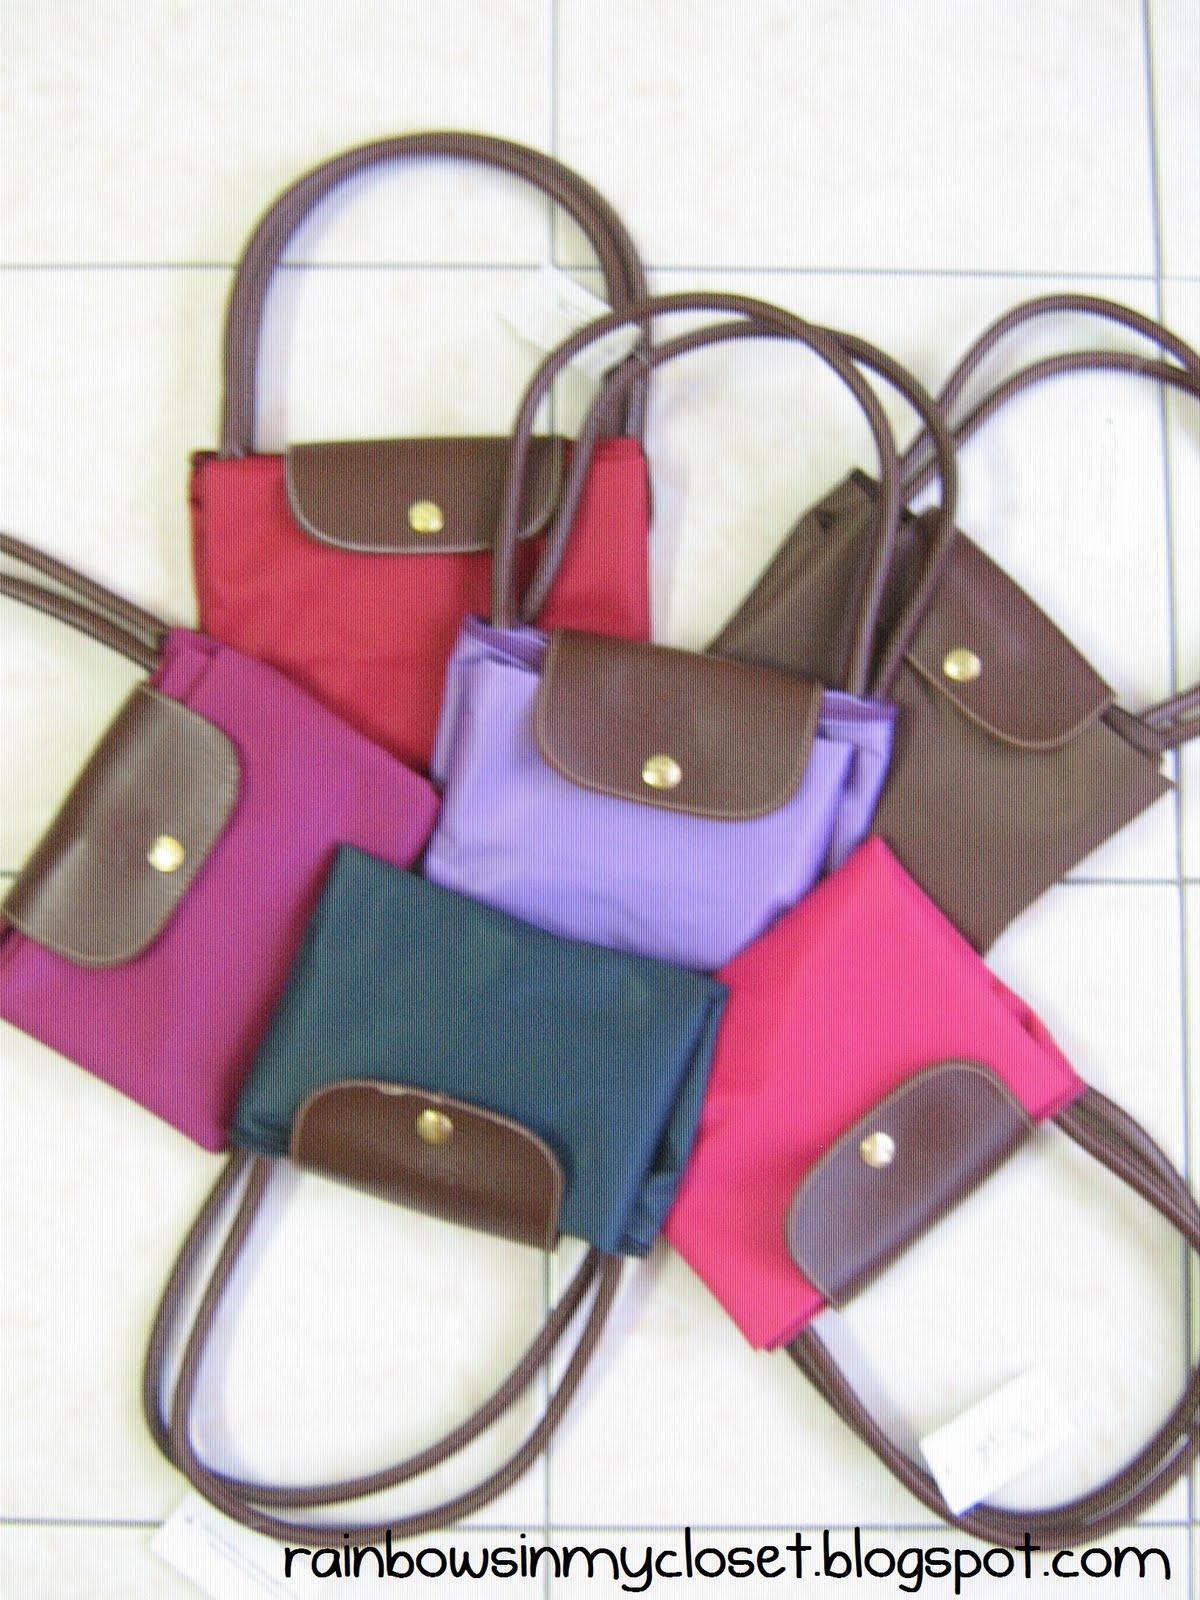 Rainbows In My Closet Longchamp Le Pliage Inspired Tote Bags